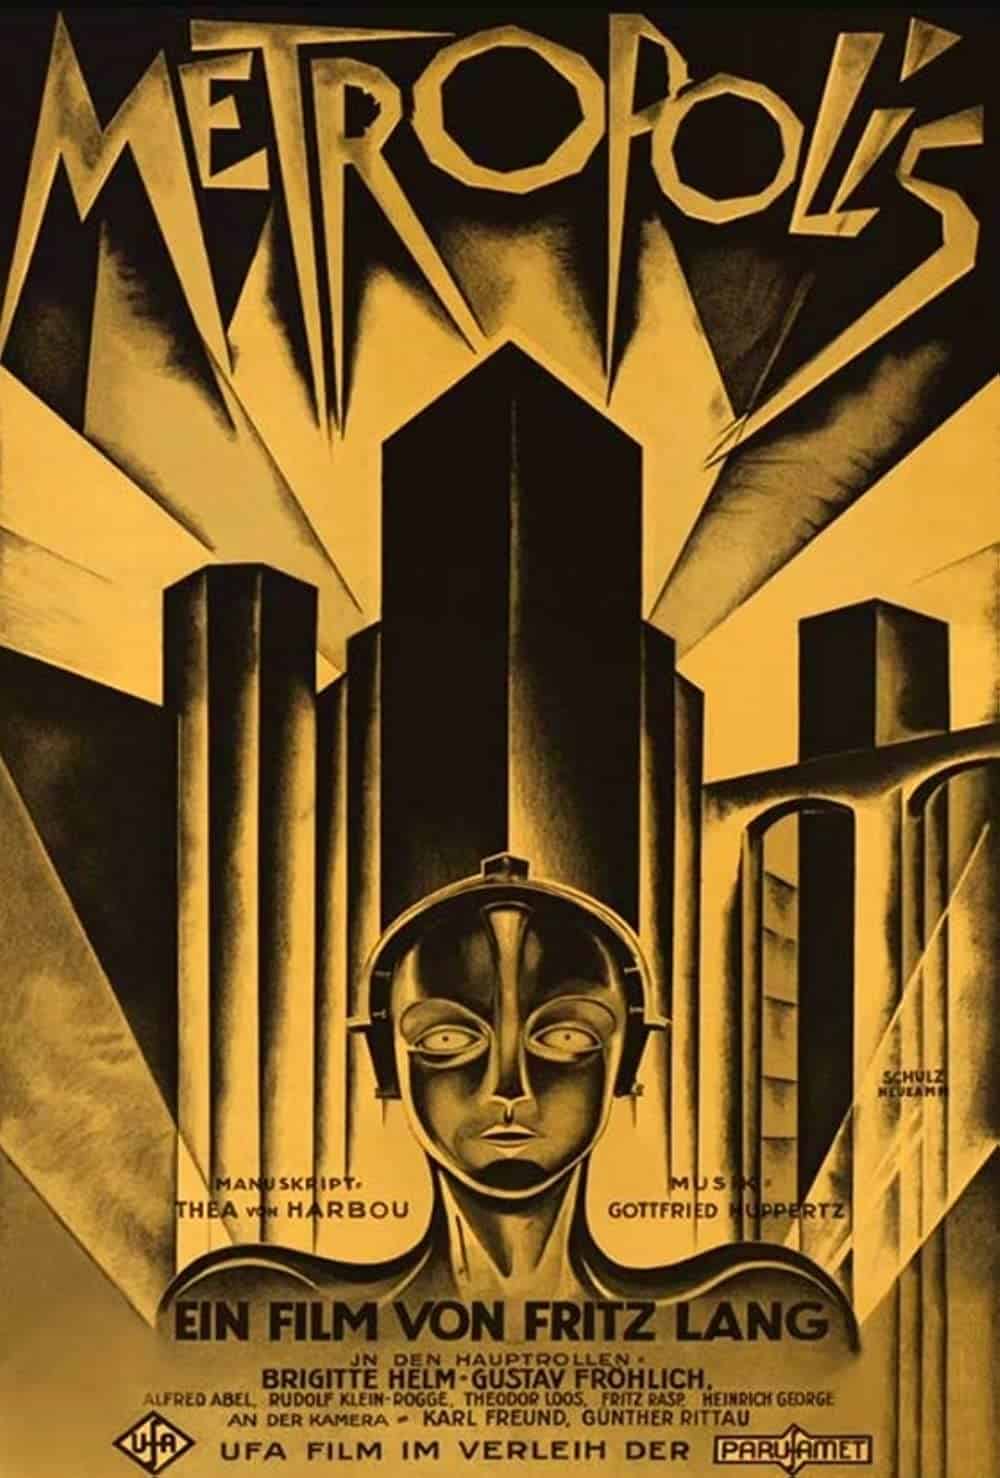 Metropolis (1927) 15 Best Steampunk Movies to Check Out